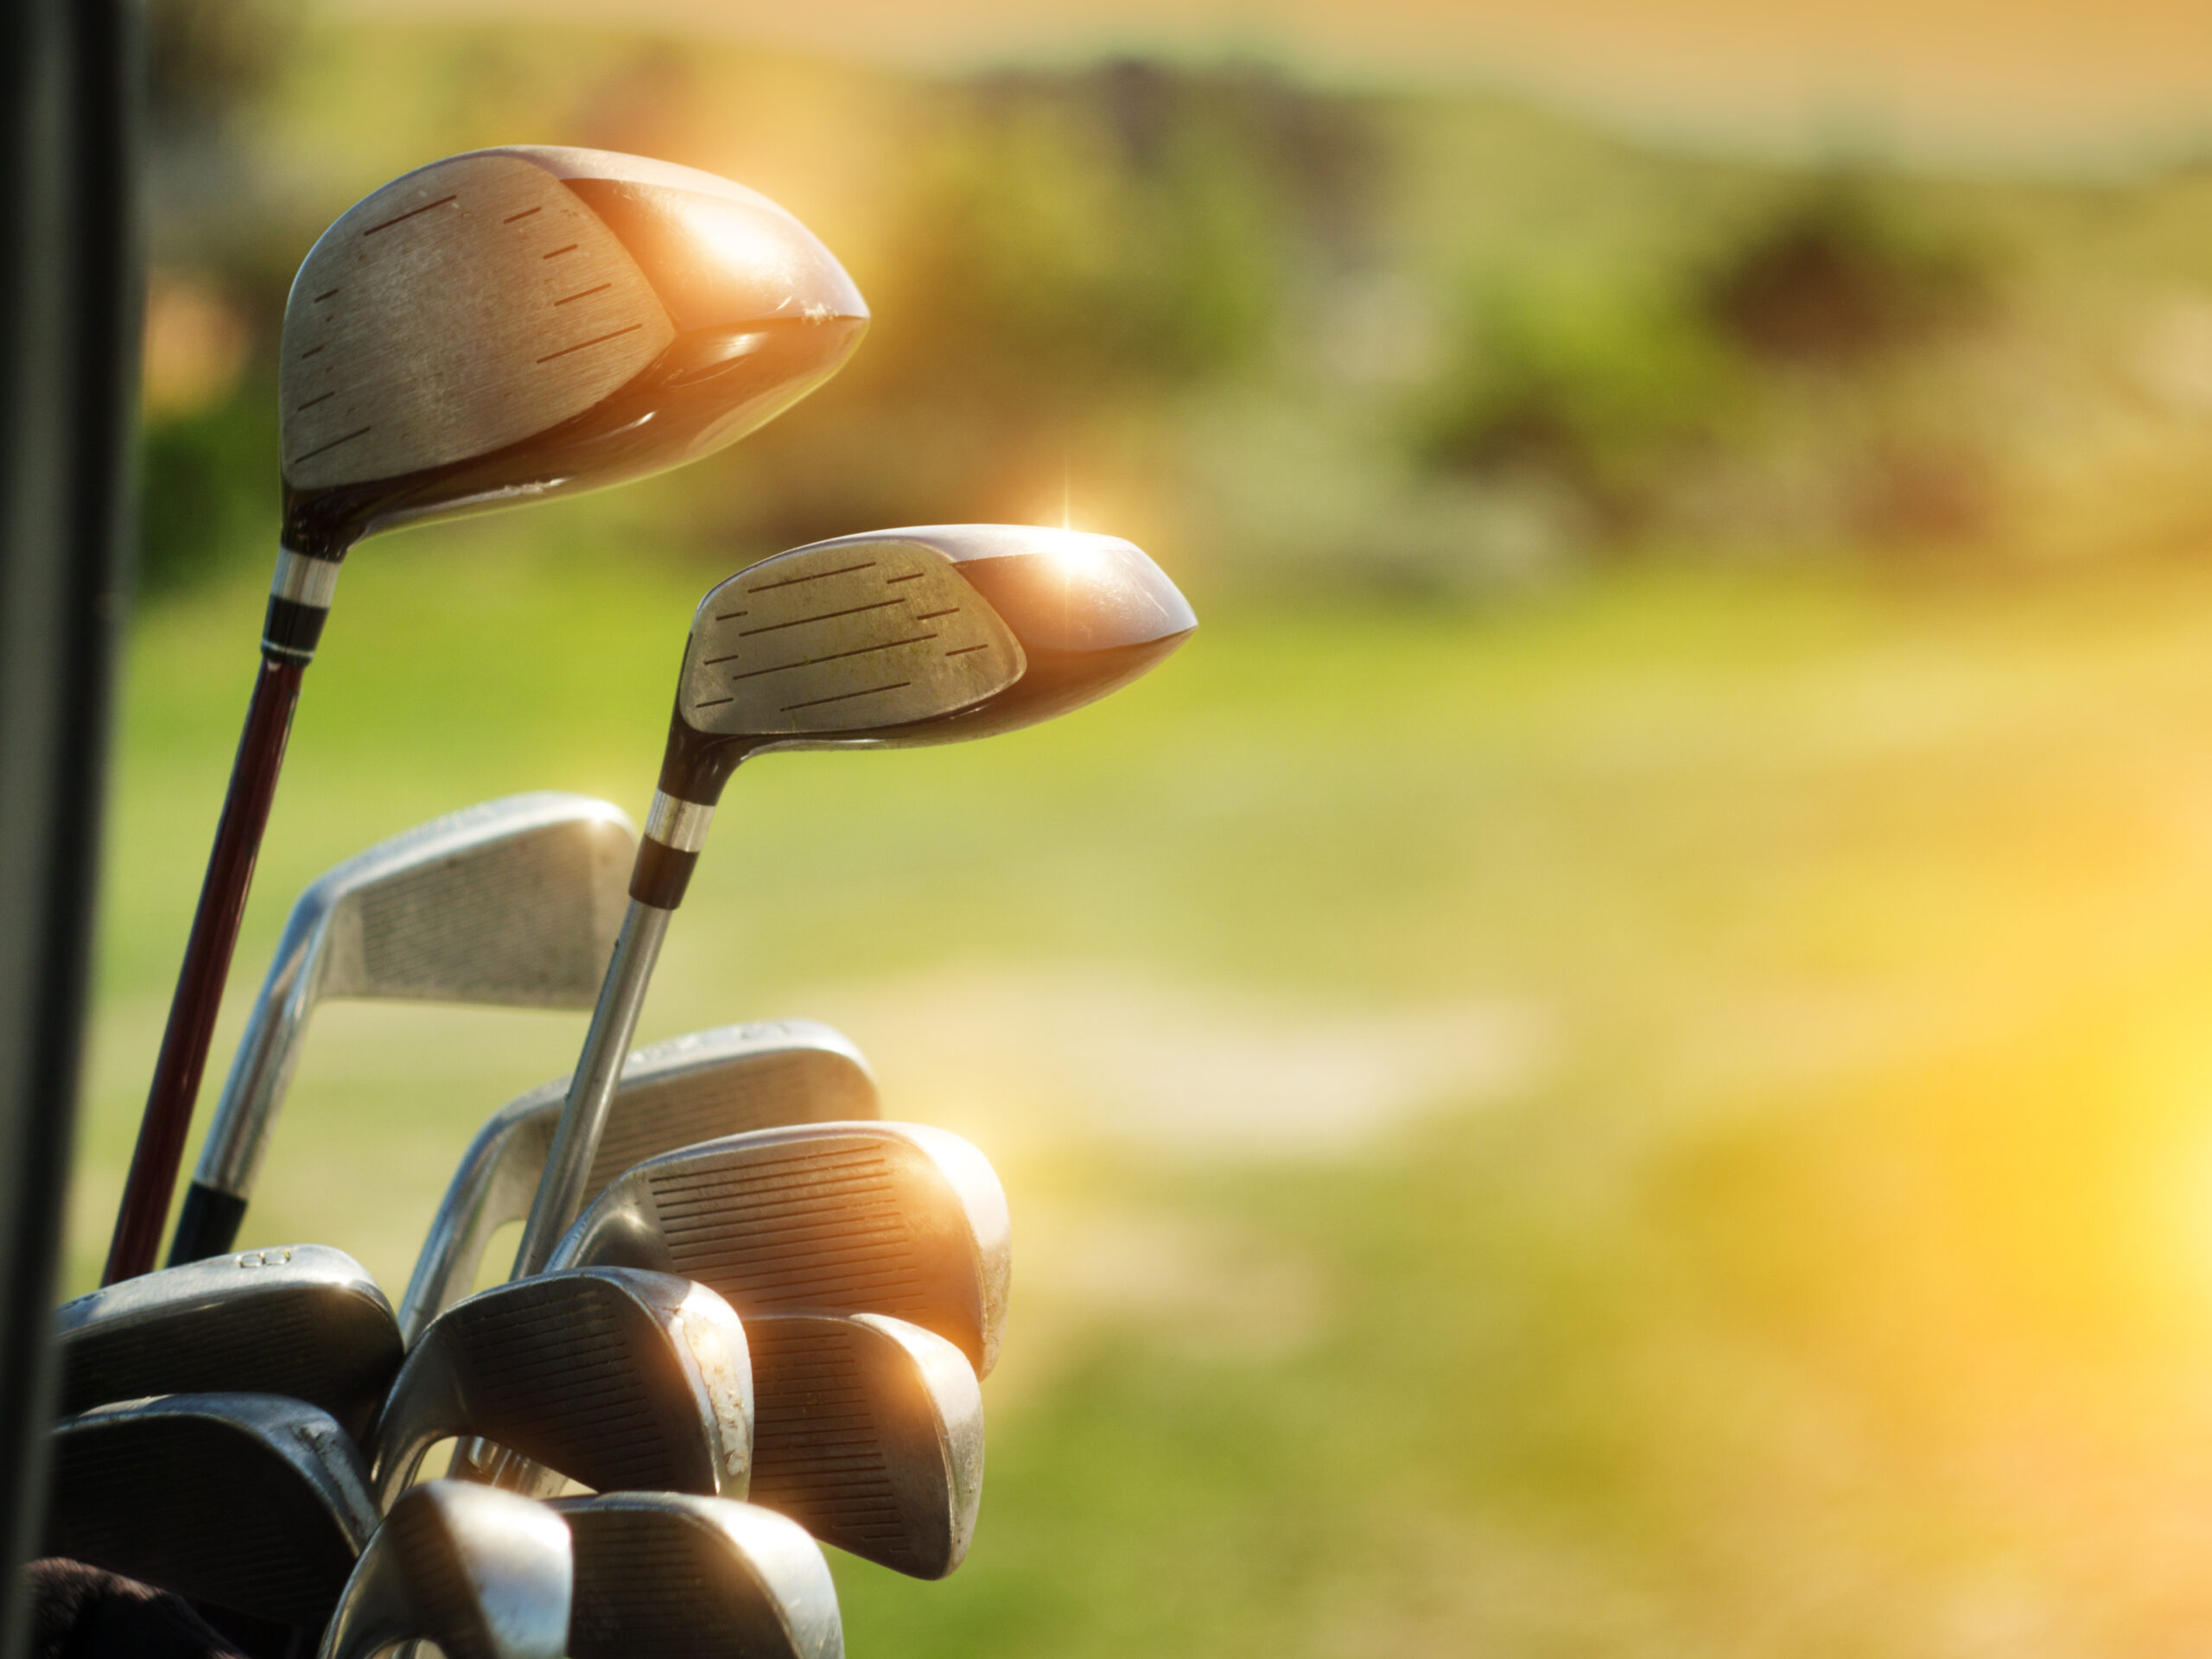 golf,clubs,drivers,over,green,field,background